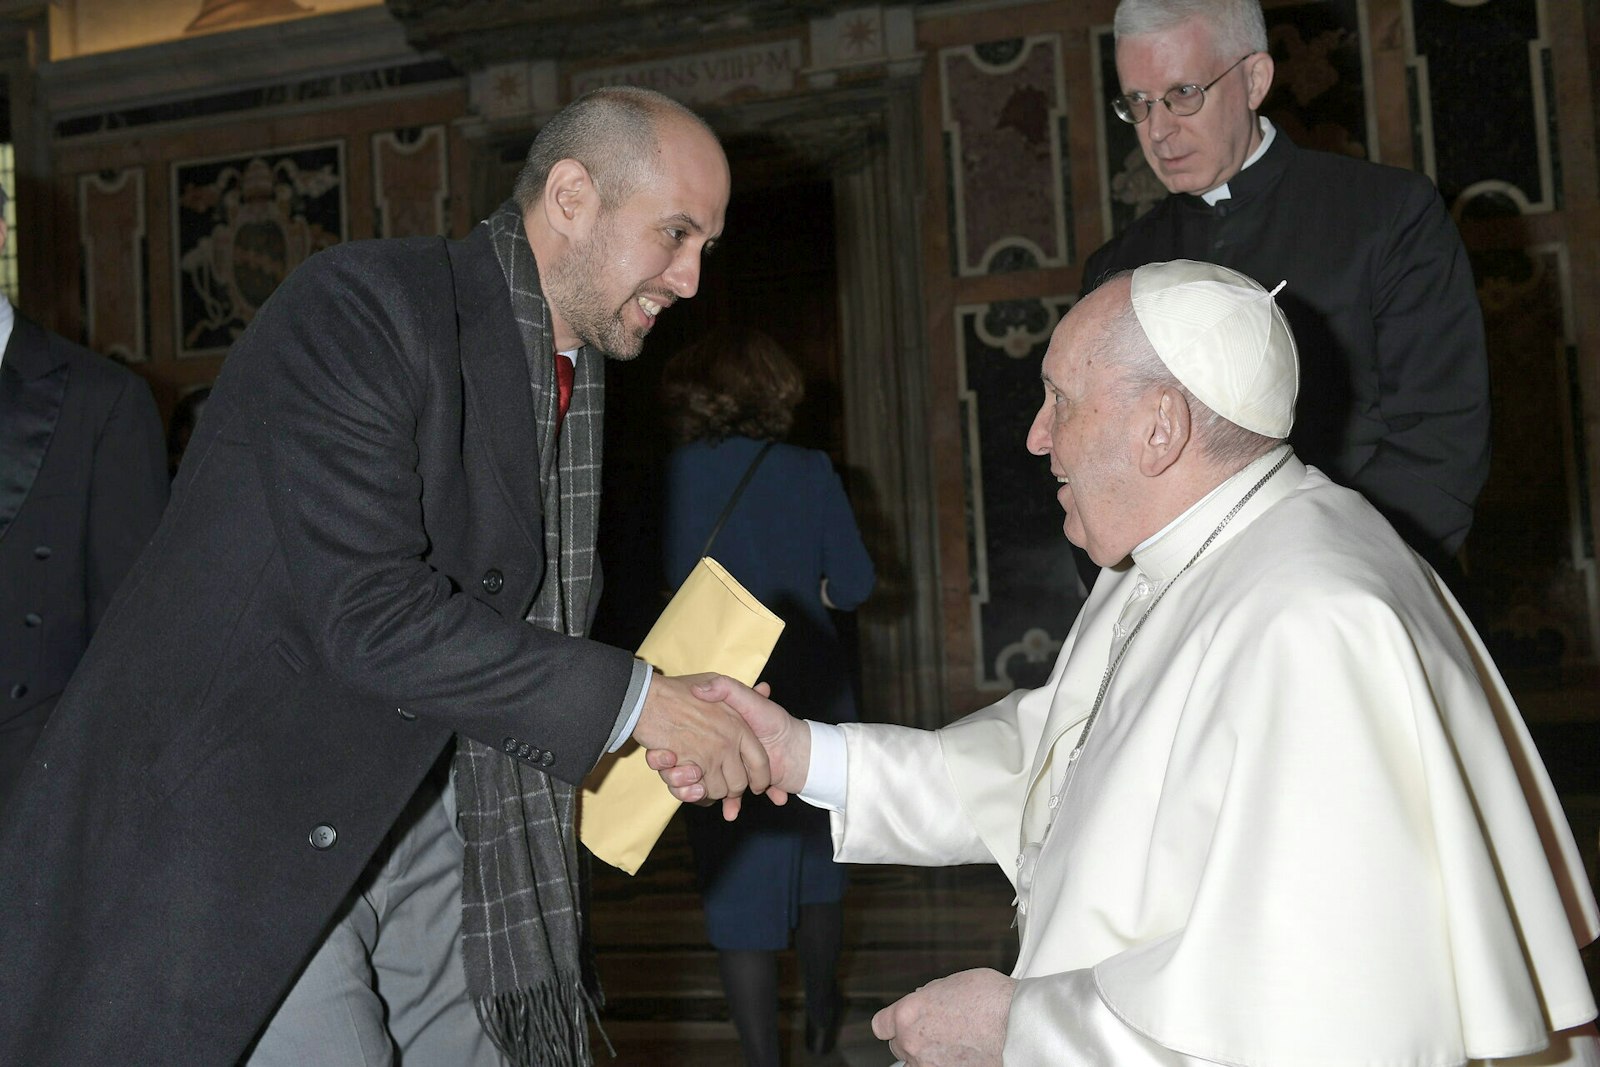 Detroit Catholic en Espanol editor and Juan Diego Network founder José Manuel De Urquidi greets Pope Francis during a general audience at the Vatican in January 2022.